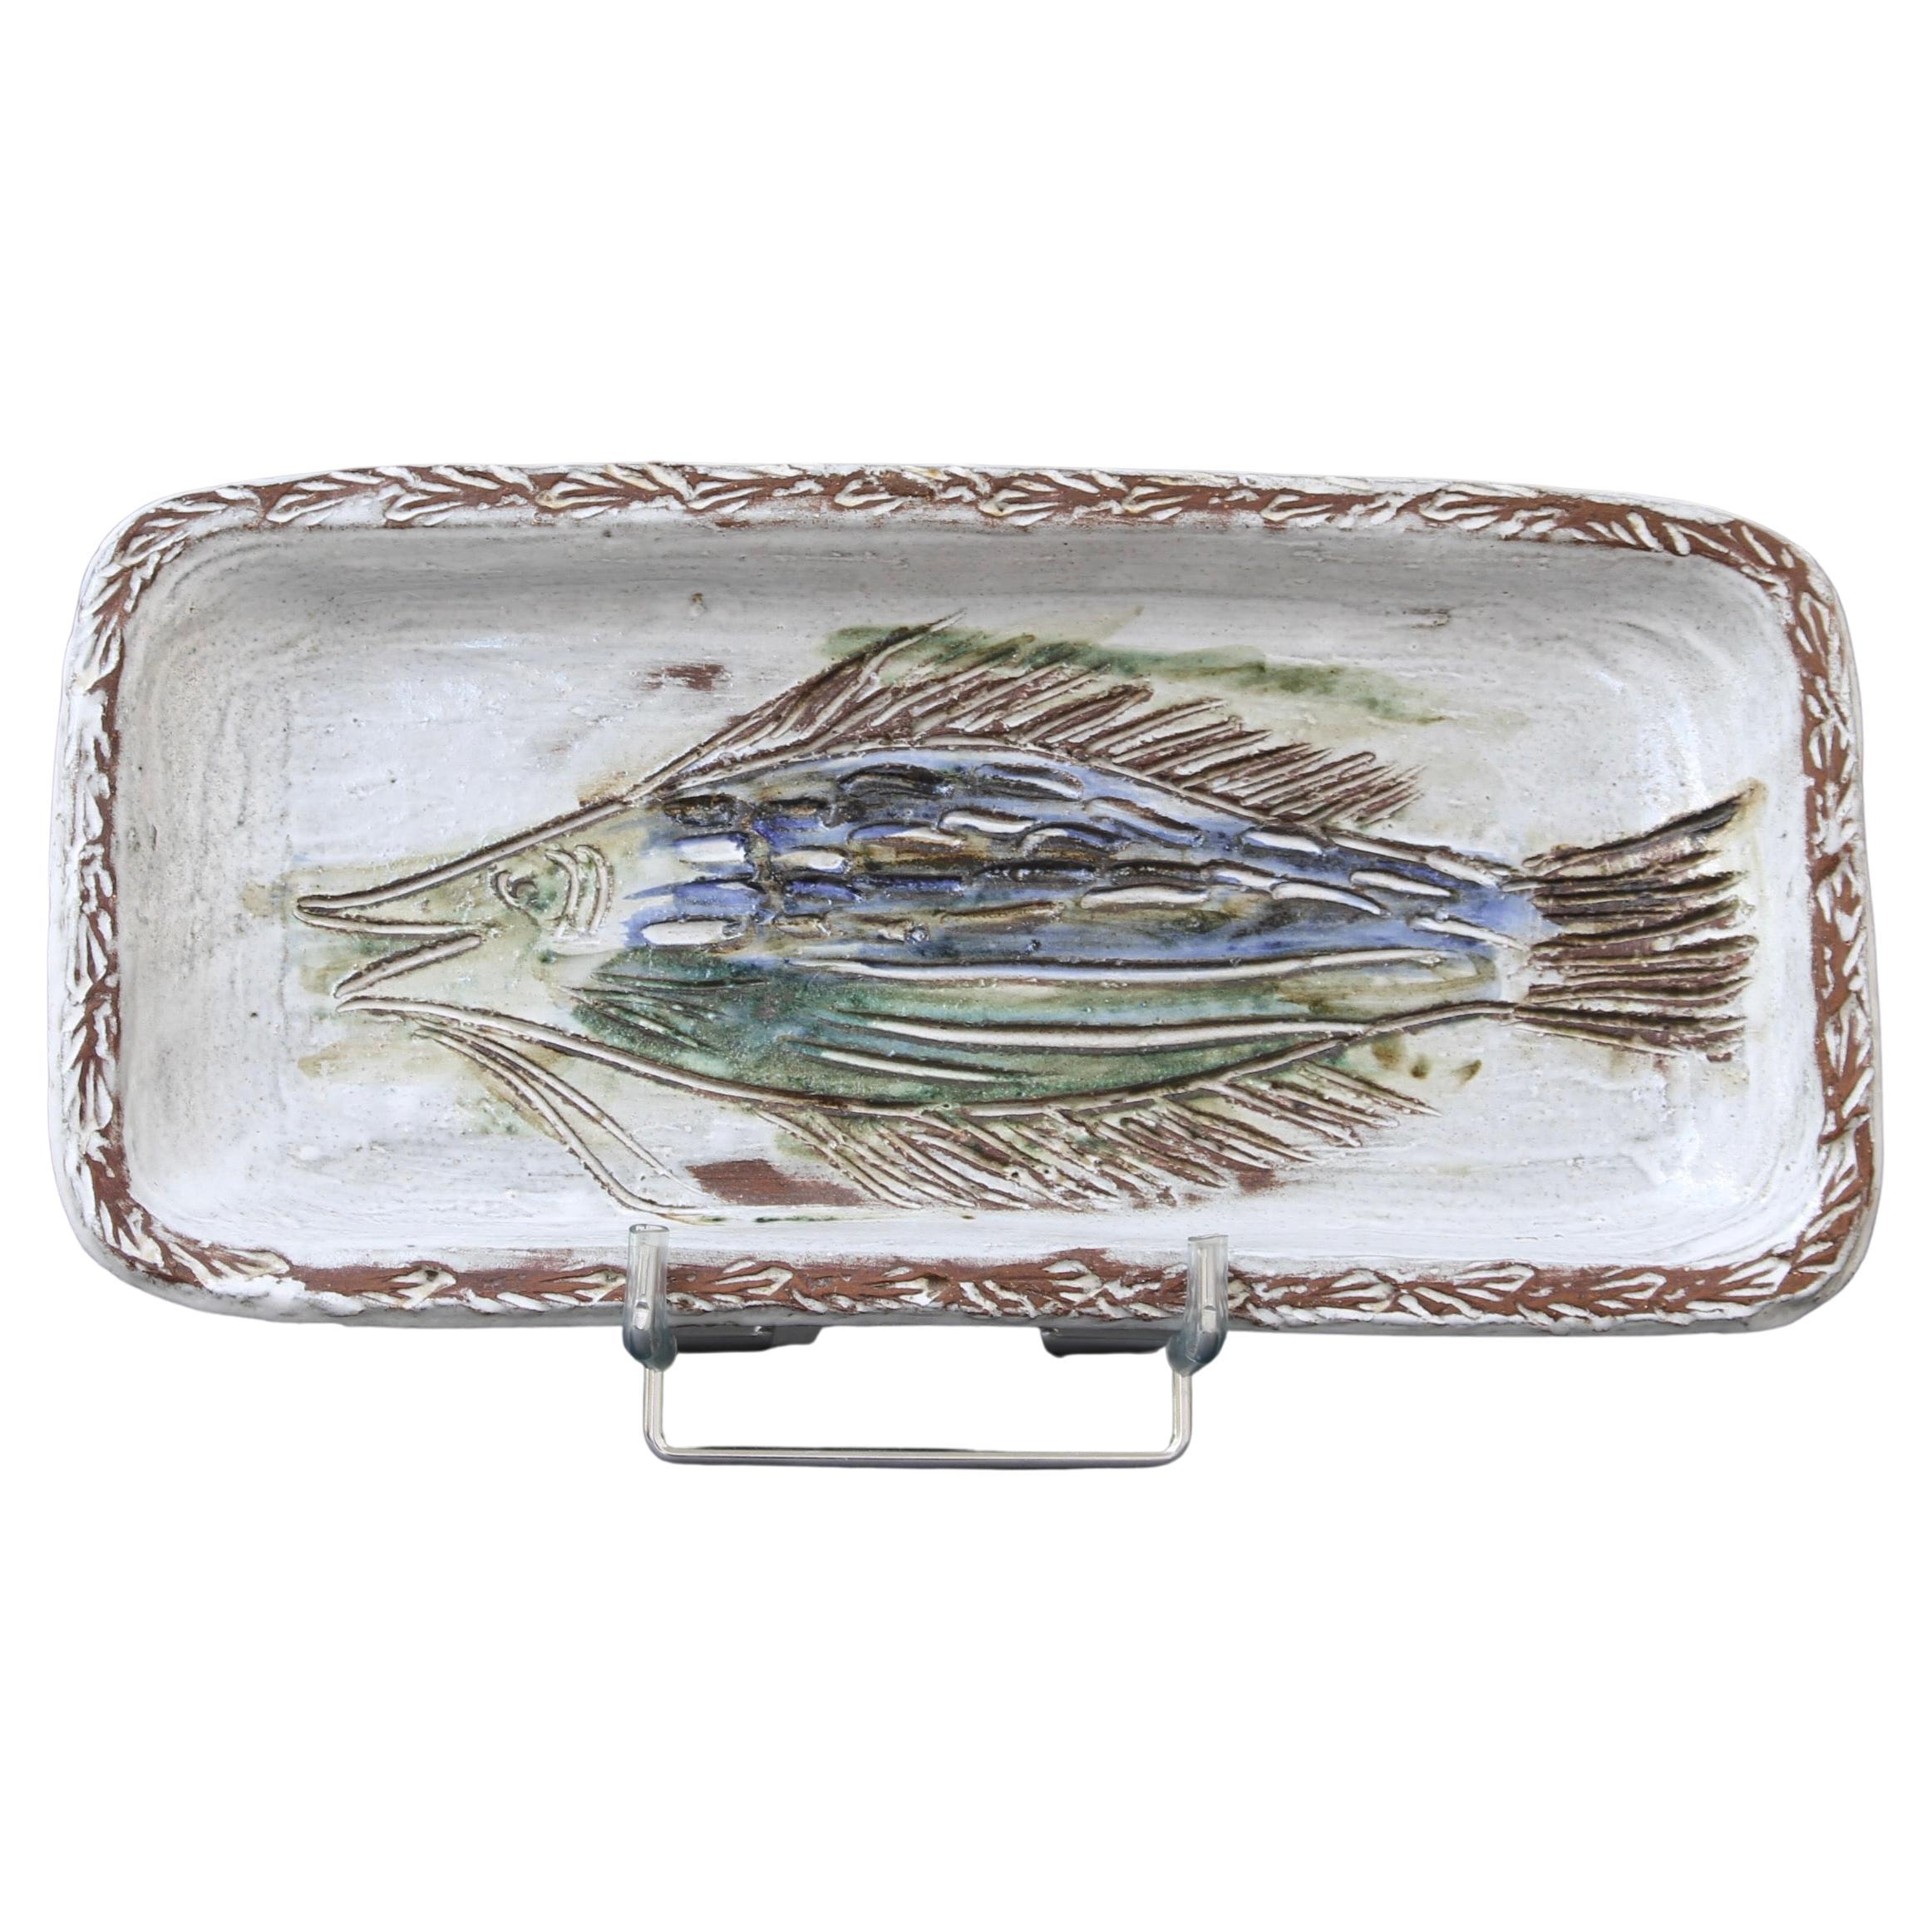 Vintage French Ceramic Tray by Albert Thiry, 'circa 1970s' For Sale